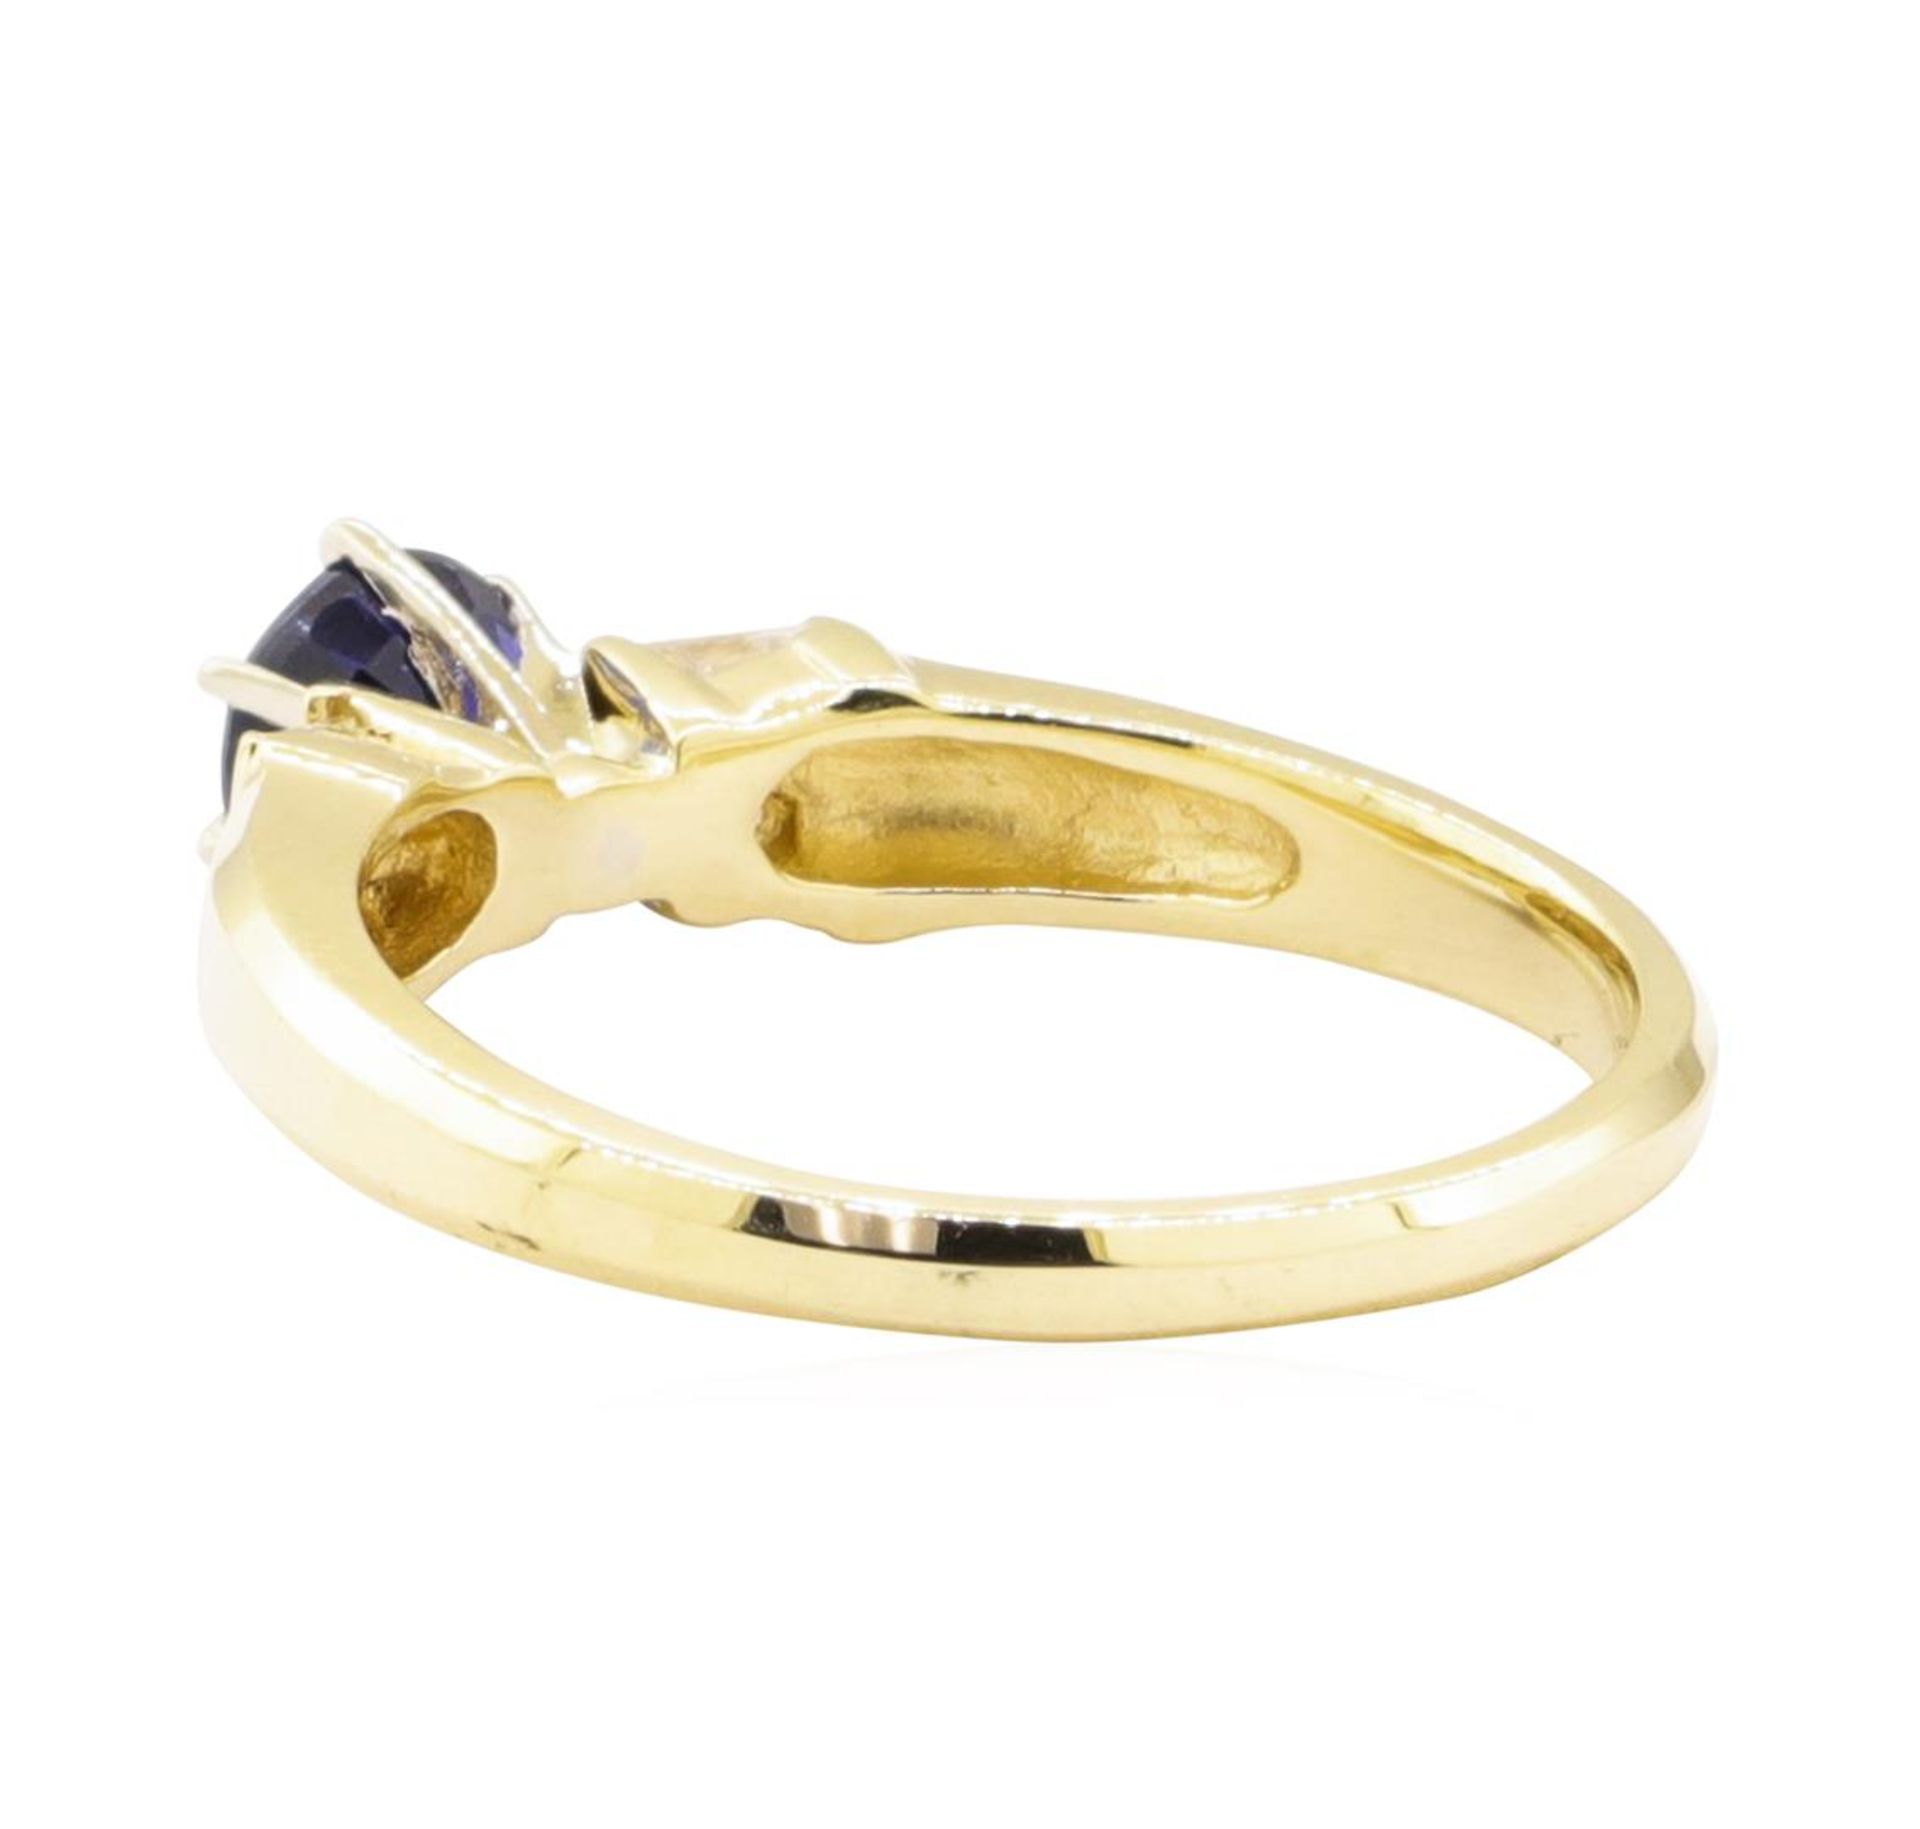 0.98ctw Blue Sapphire and Diamond Ring - 14KT Yellow Gold - Image 3 of 4